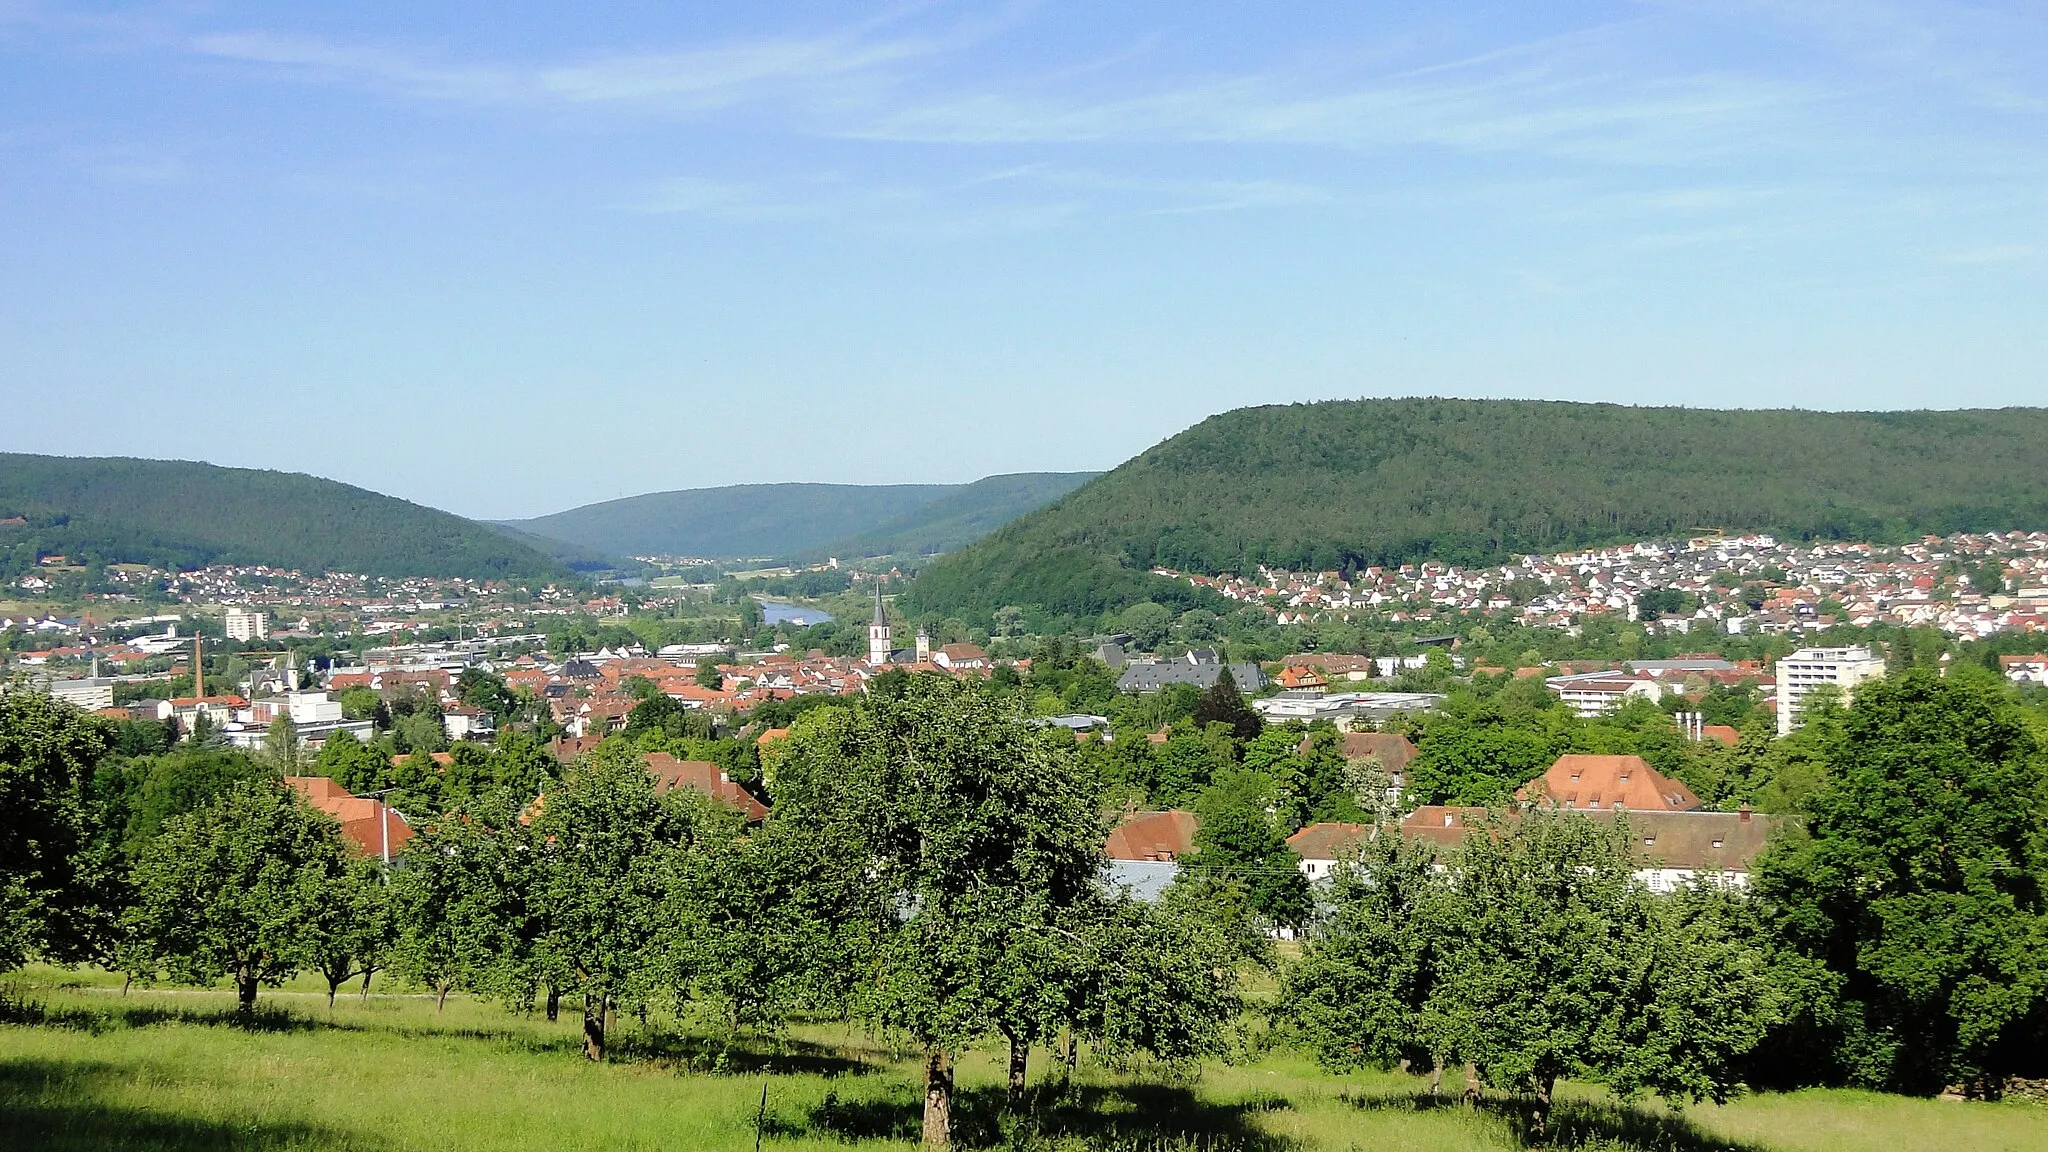 Photo showing: View of Lohr am Main, Germany, from the Lohrer Alm